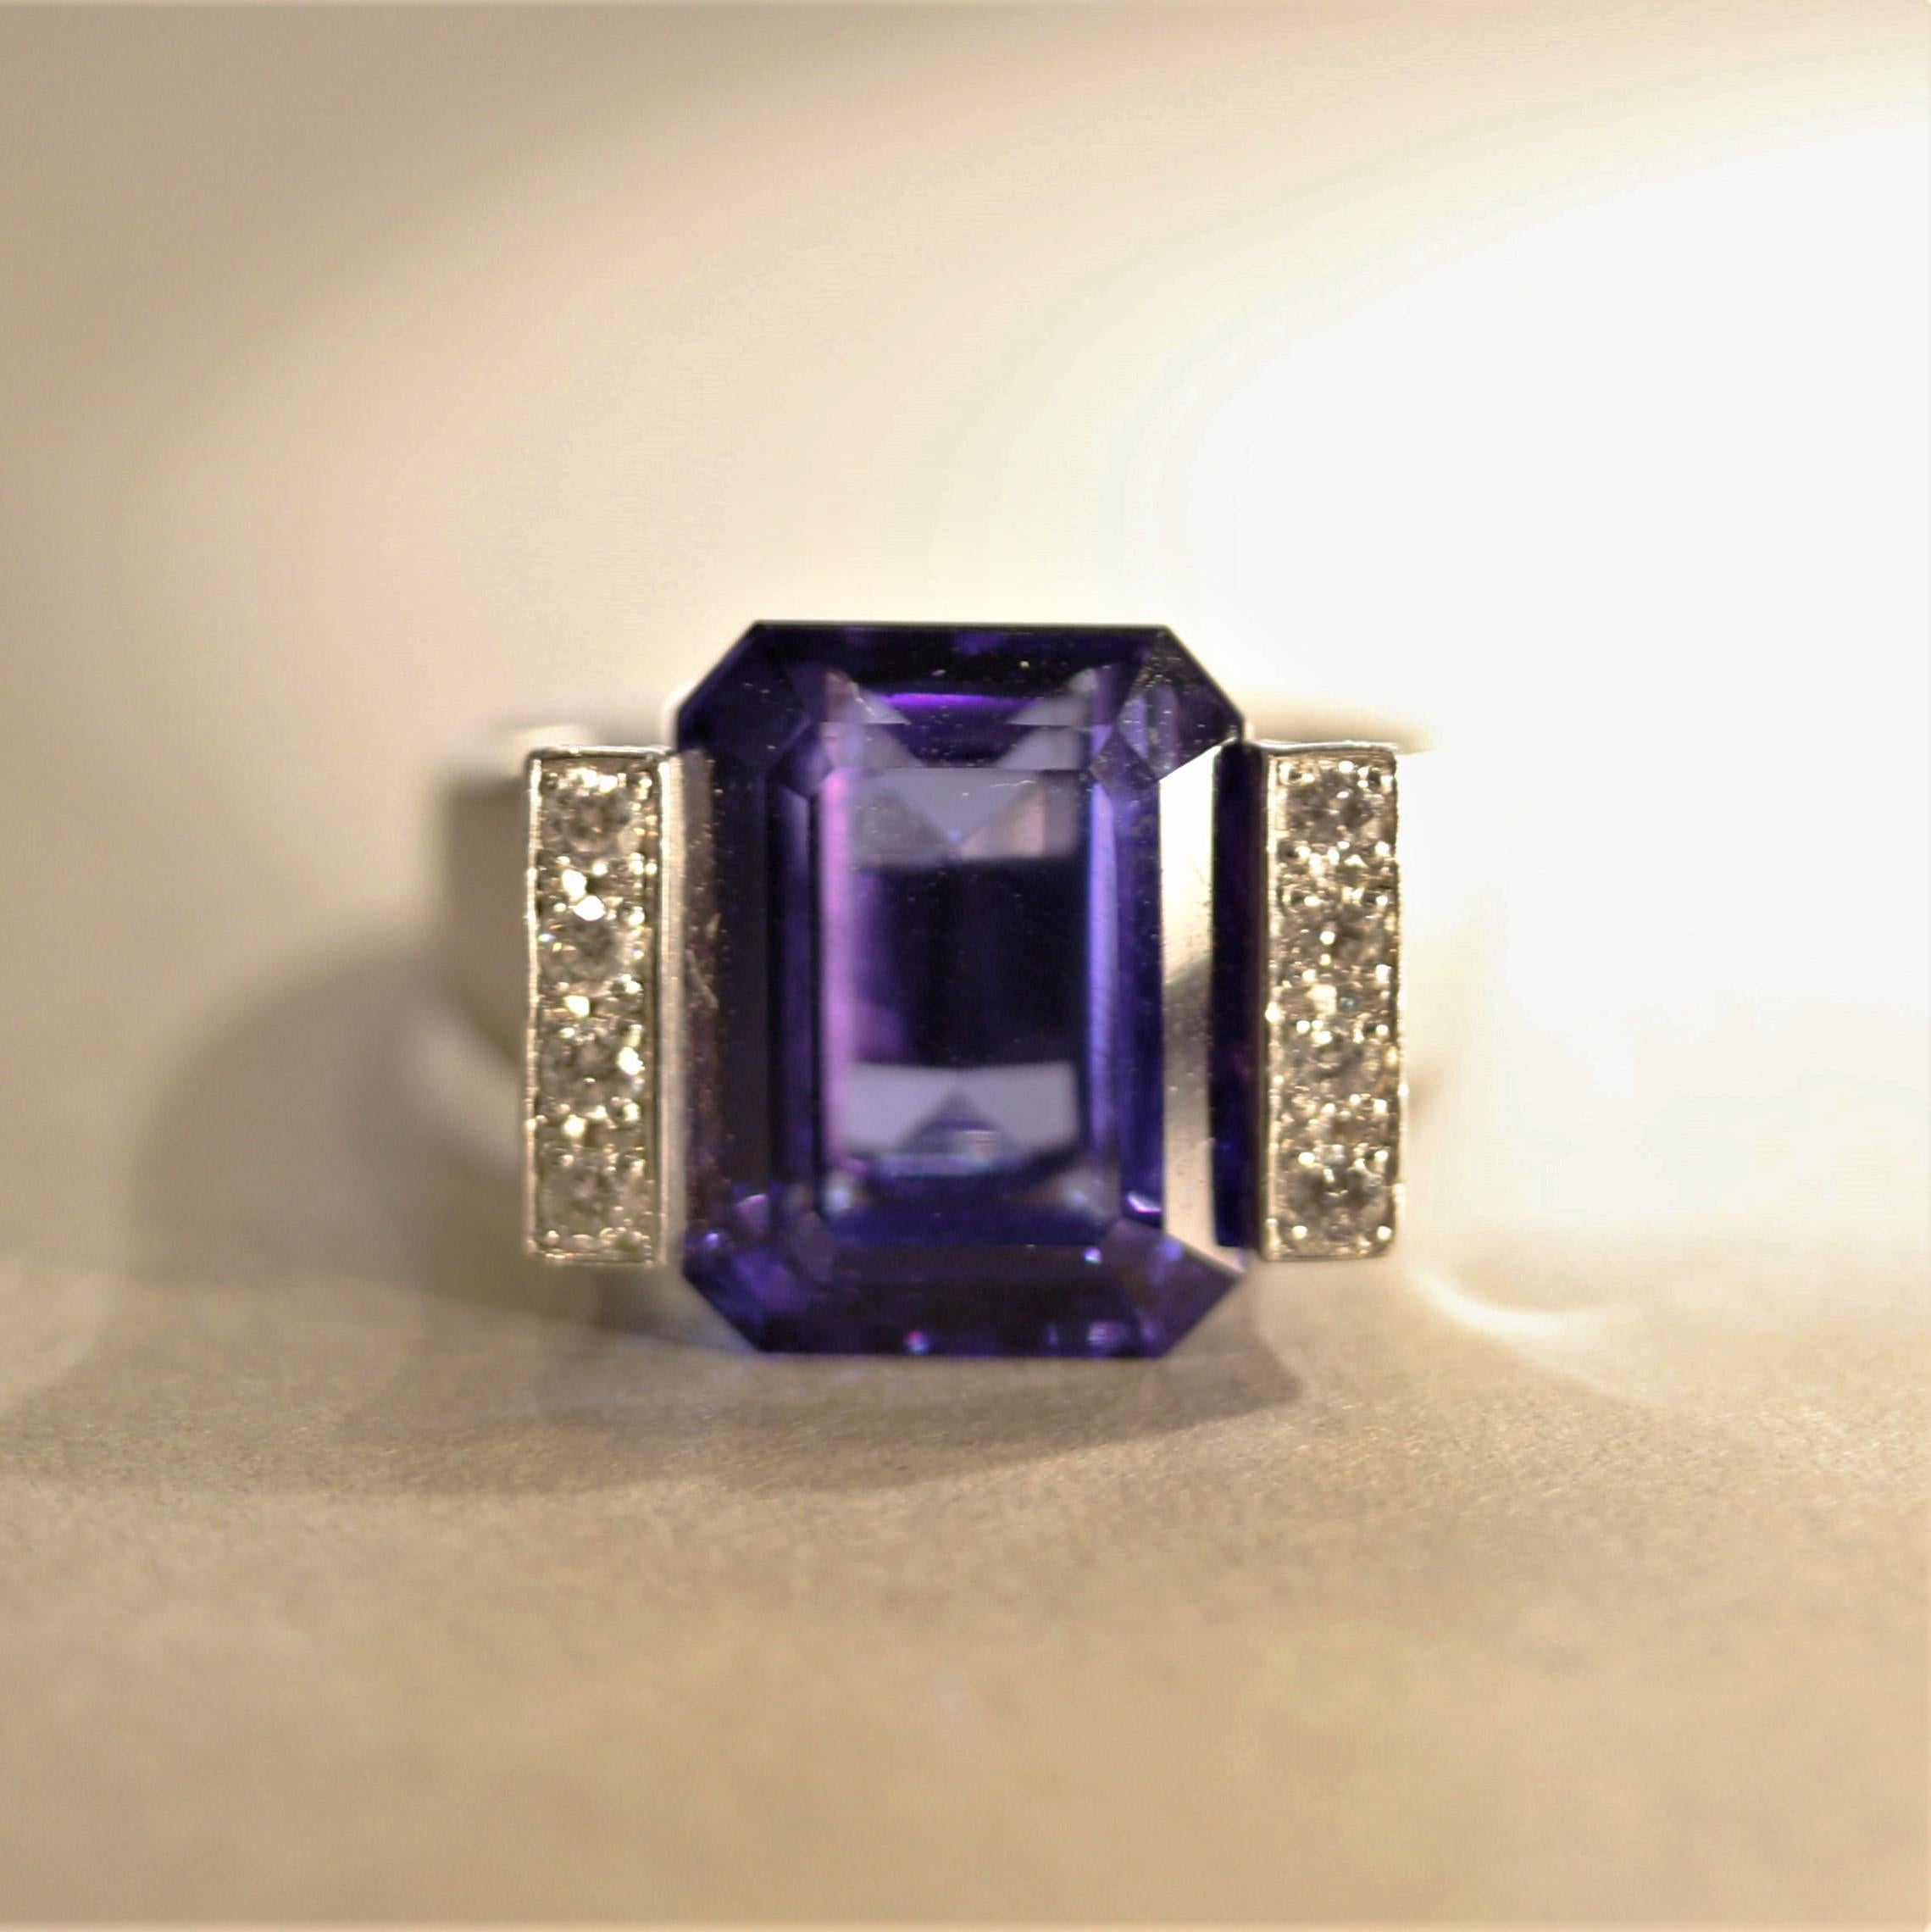 A unique and modern design, this ring features a 10.79 carat gem tanzanite with exceptional color and clarity. It is an emerald-cut with an intense purplish-blue color that can rival the finest sapphires. It is accented by two rows of round